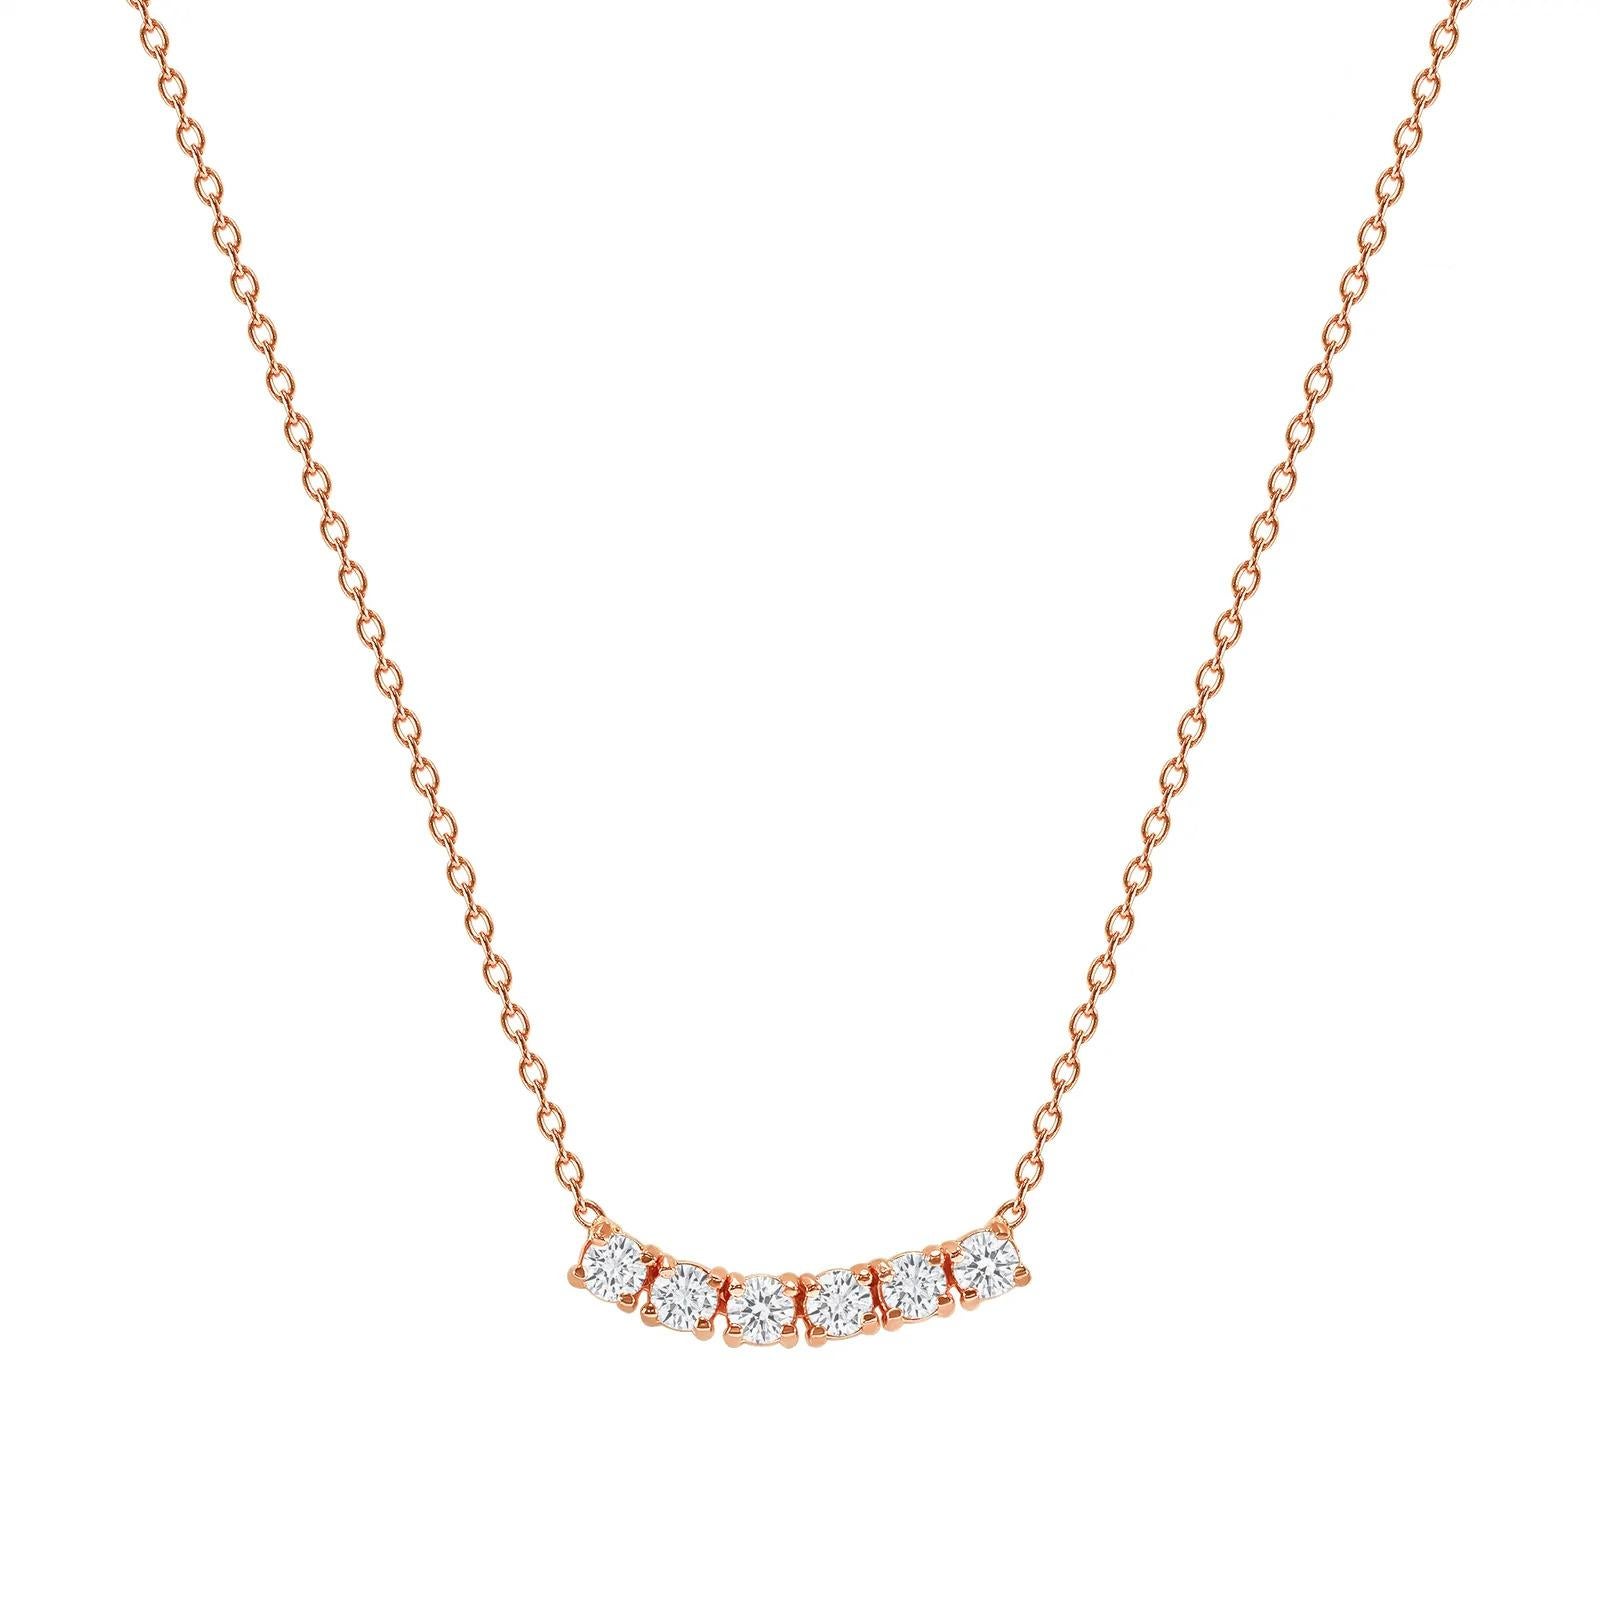 This petite, curved diamond necklace is crafted with gorgeous 14k gold set with six round diamonds.  

Gold: 14k 
Diamond Total Carats: 1 ct
Diamond Cut: Round (6 diamonds)
Diamond Clarity: VS
Diamond Color: F
Color: Rose Gold
Necklace Length: 24